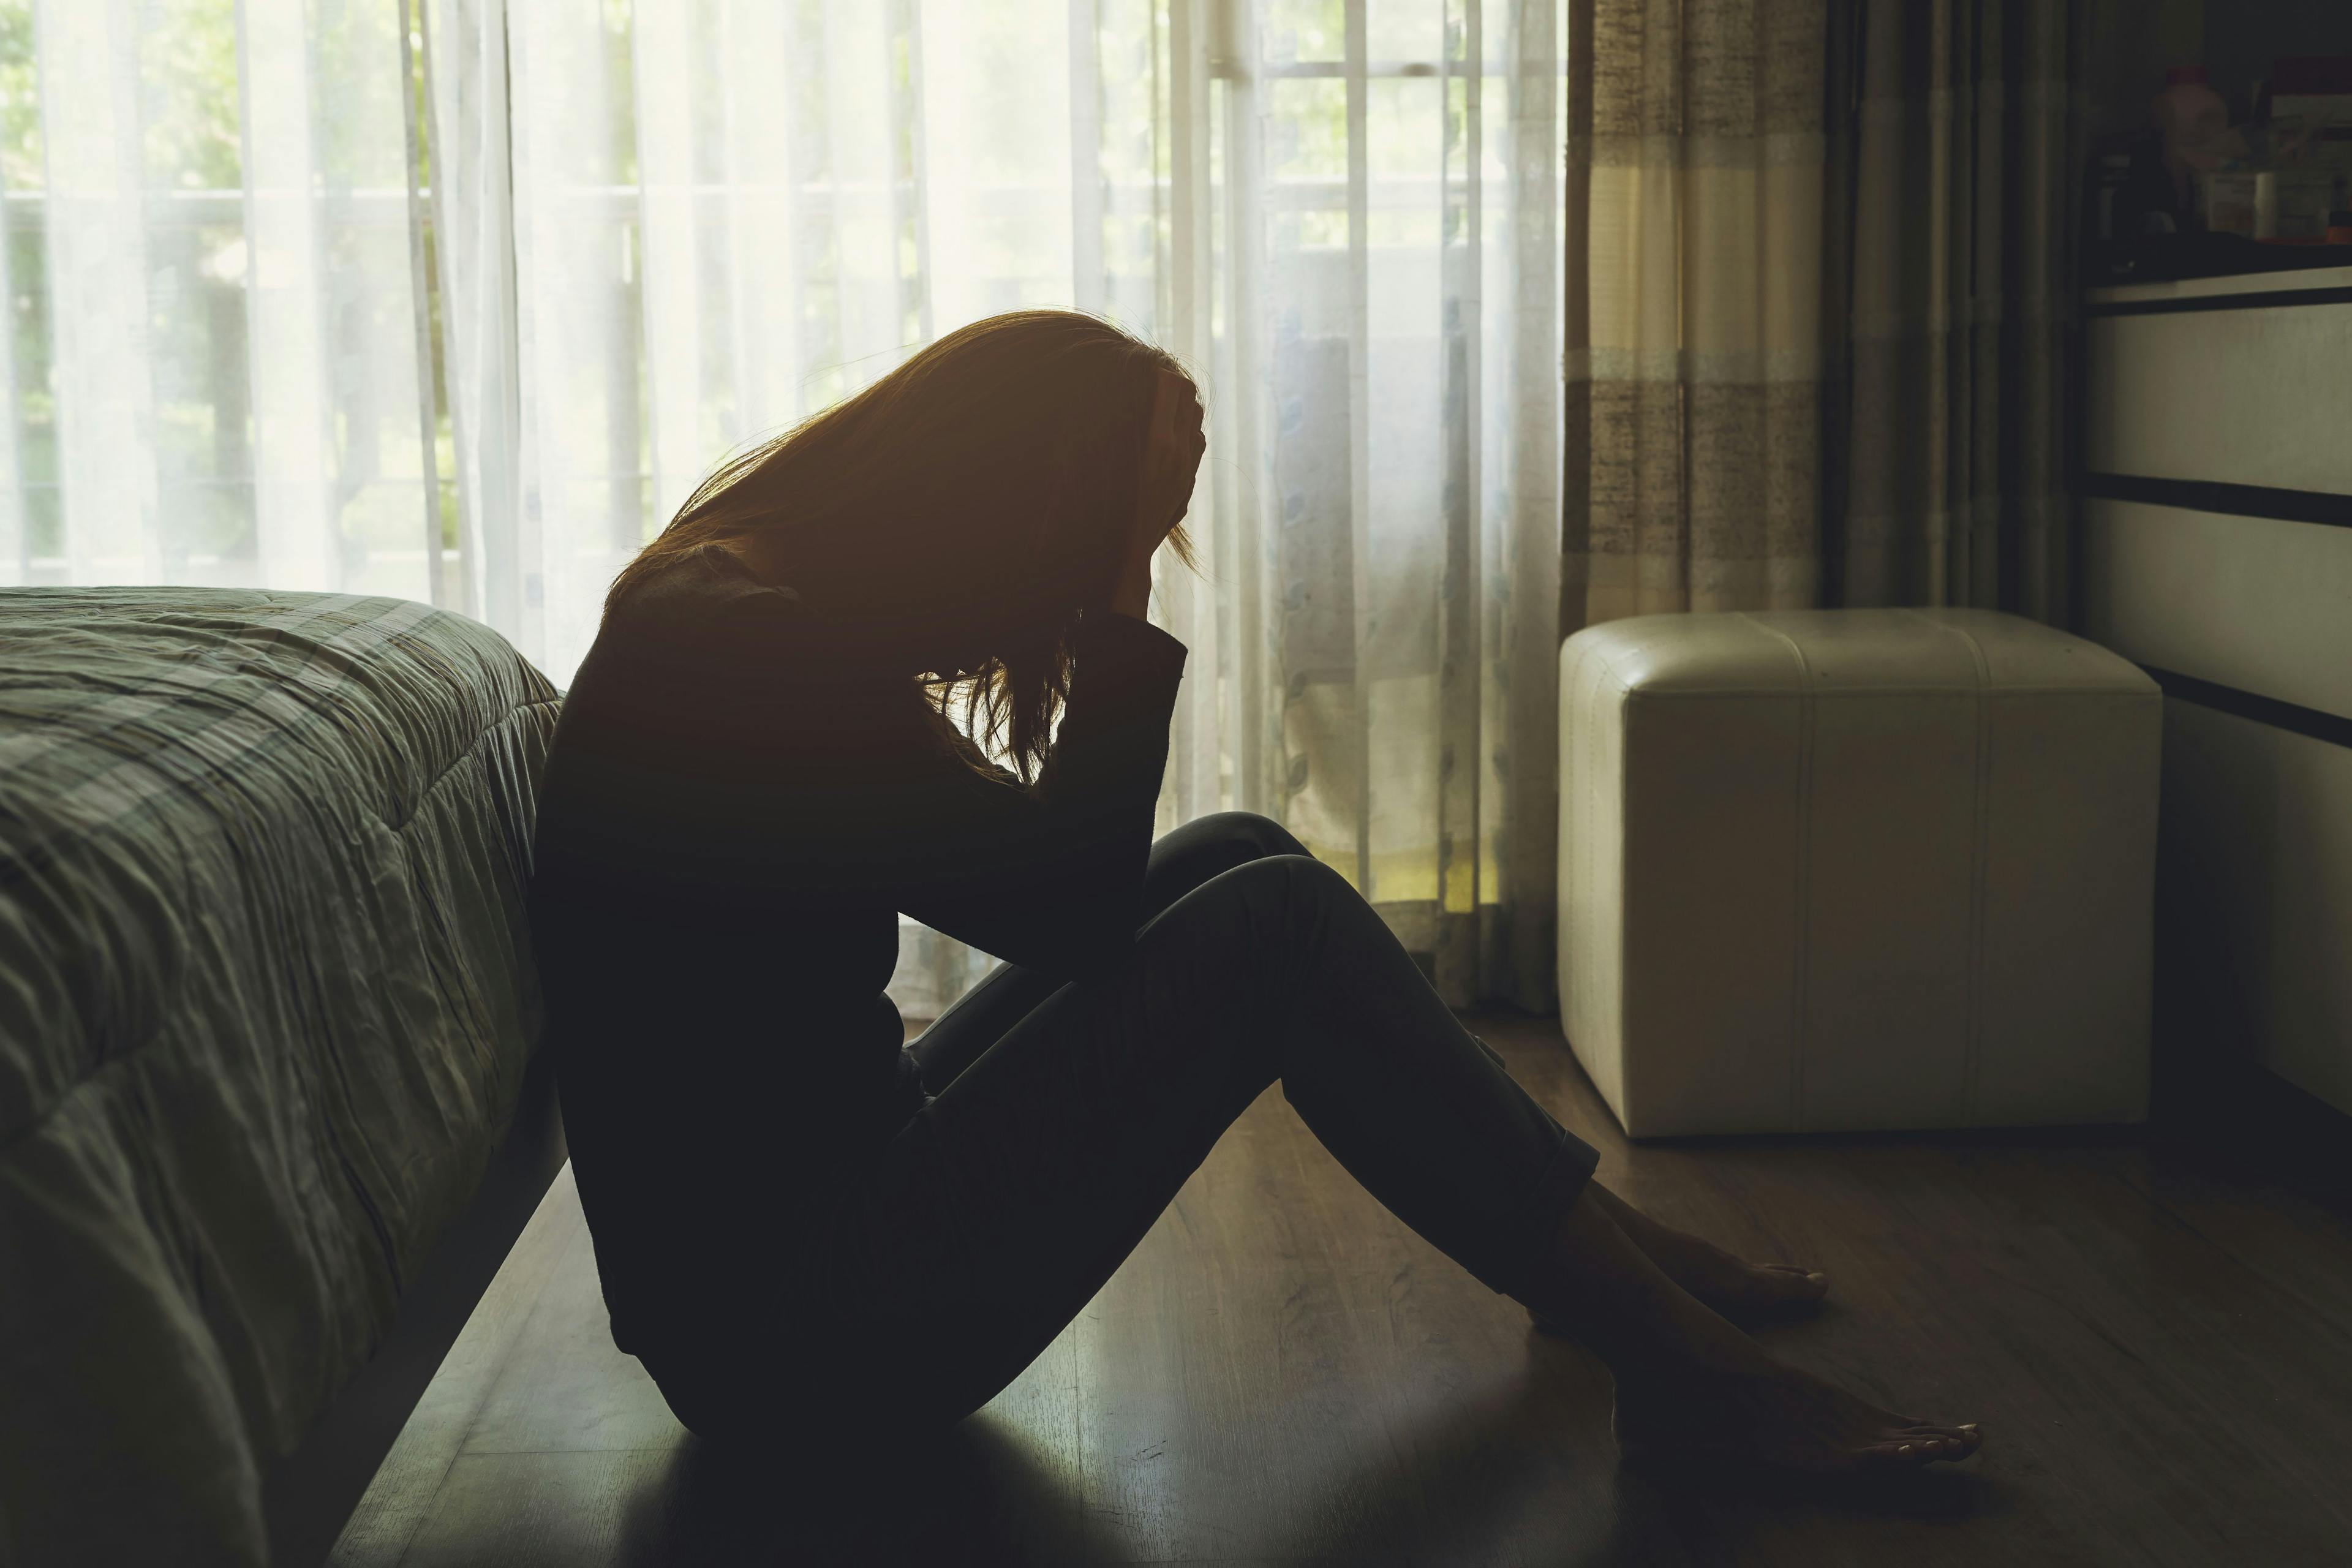 MS Patients Experienced New Depression, Anxiety During COVID-19